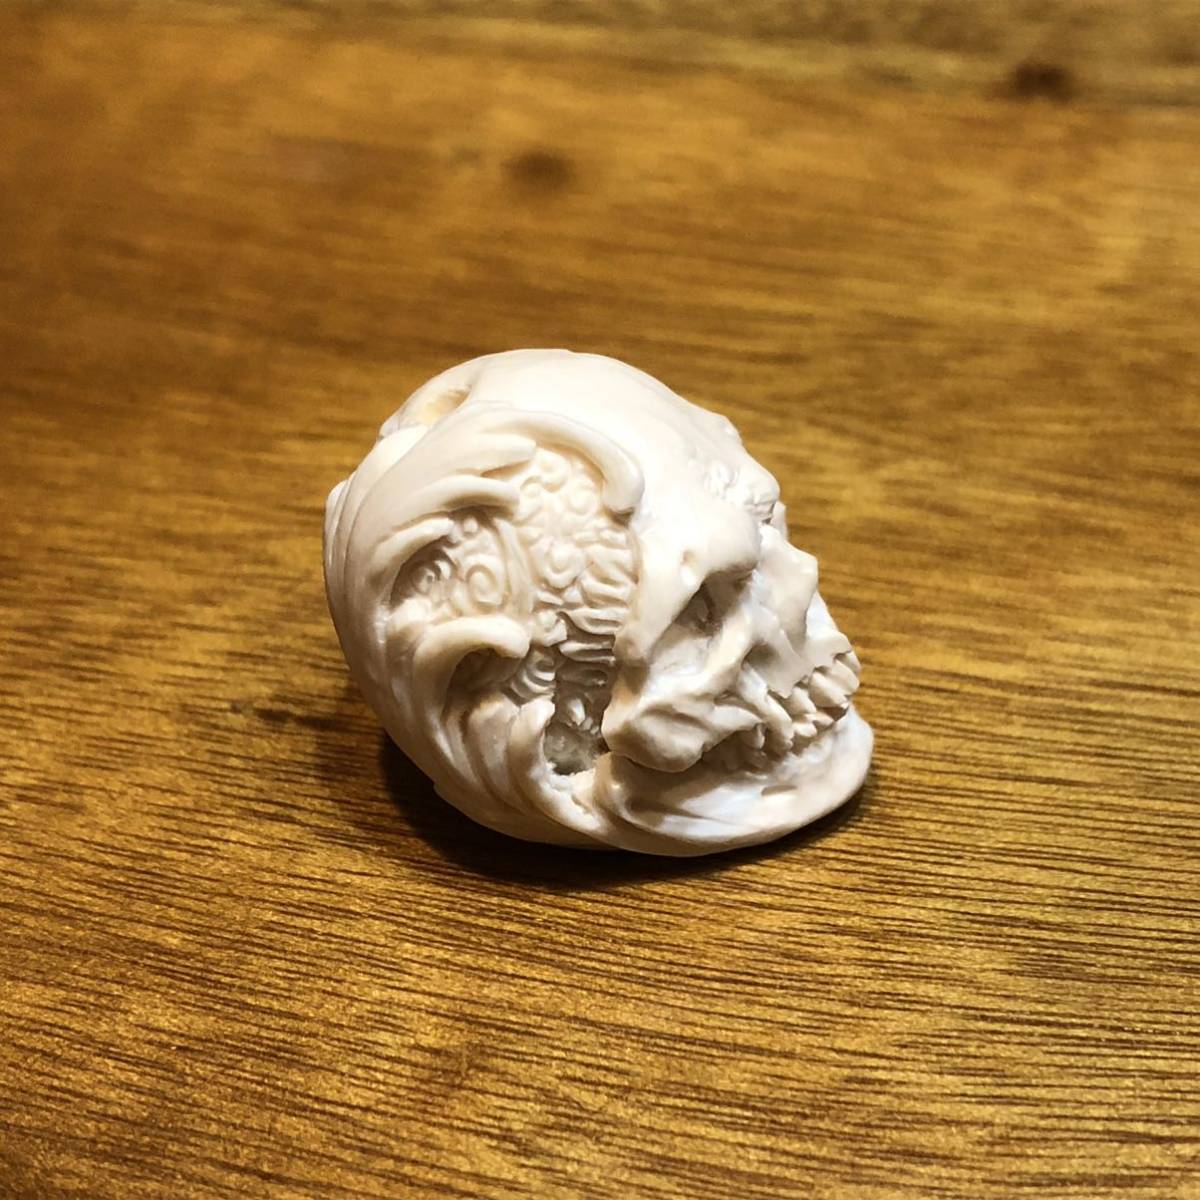 *..CARVEX* hand carving Tang . peace pattern .. netsuke arm guard kote work mammoth ivory made . thing pendant strap hand made skeleton Skull skull free shipping 6